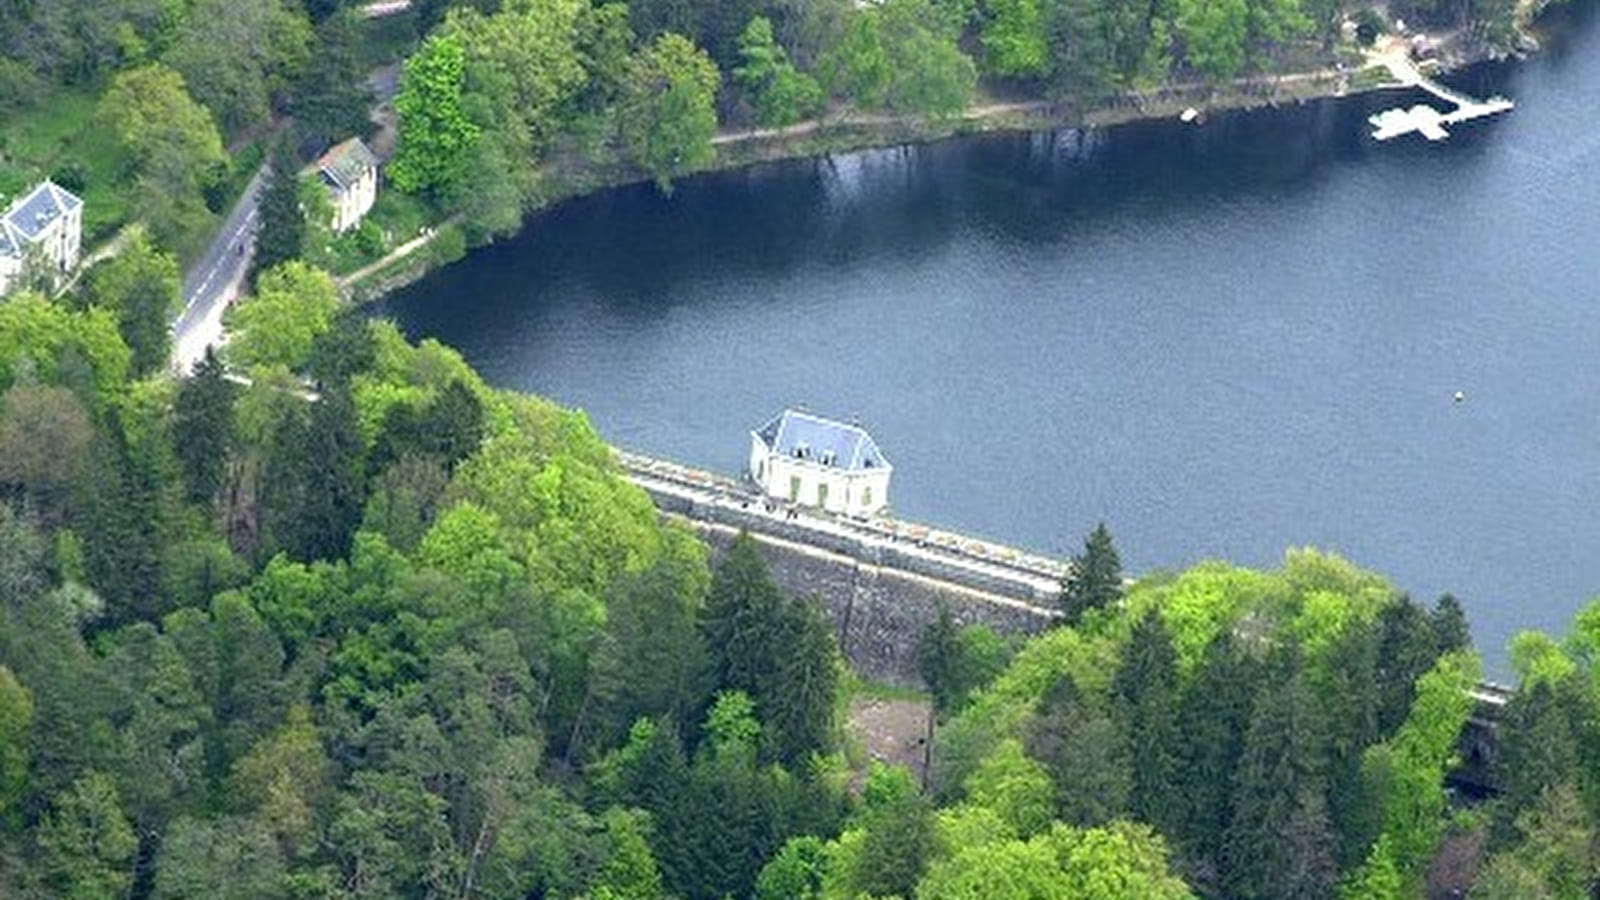 Guided tour of the Lac des Settons dam